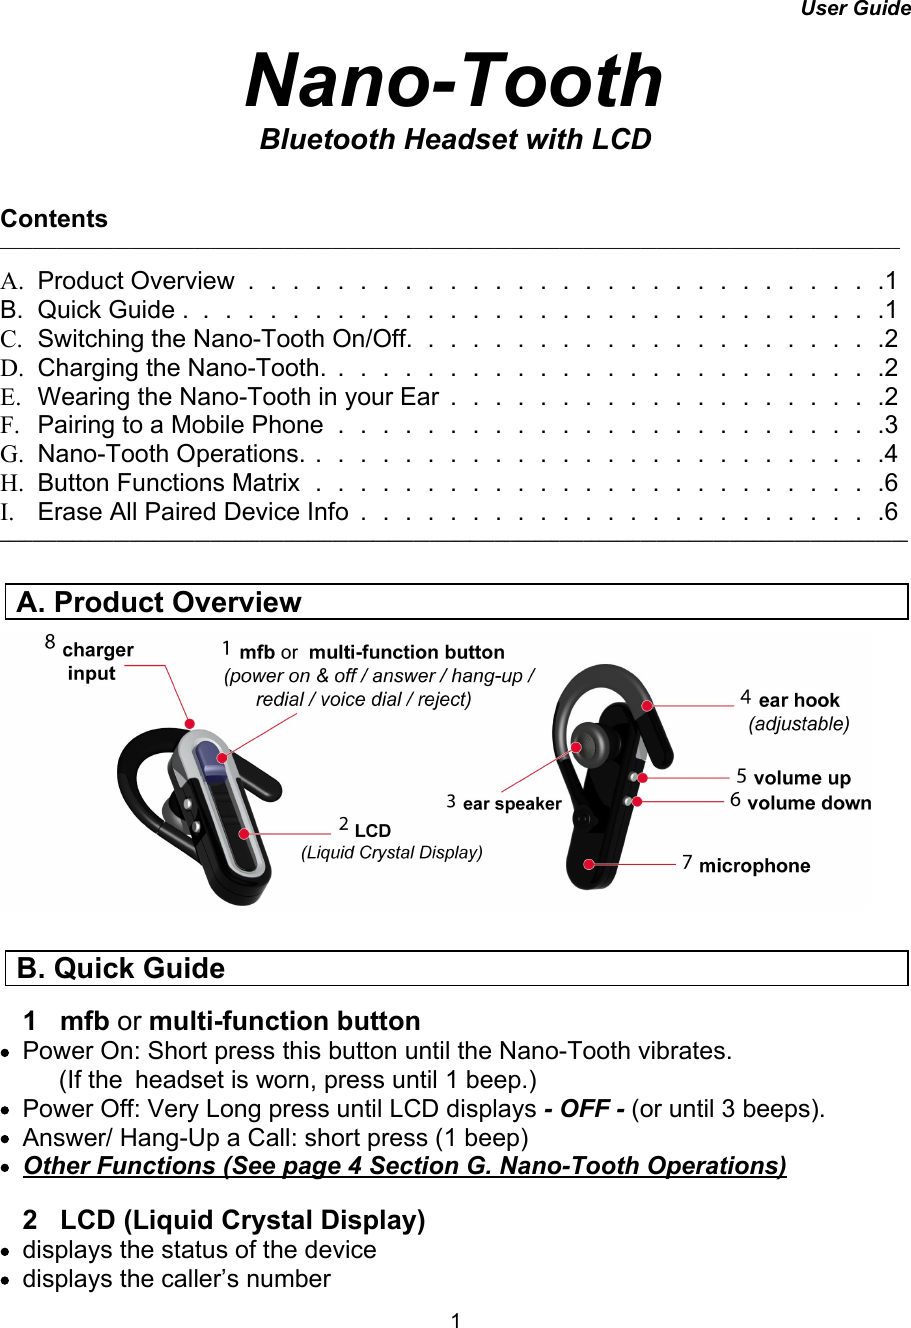 User GuideNano-ToothBluetooth Headset with LCDContents_______________________________________________________________________________________________________________A. Product Overview.............................1B.Quick Guide ................................1C. Switching the Nano-Tooth On/Off. . . . . . . . . . . . . . . . . . . . . .2D. Charging the Nano-Tooth. . . . . . . . . . . . . . . . . . . .  . . . . . .2E. Wearing the Nano-Tooth in your Ear . . . . . . . . . . . . . .  . . . . . .2F. Pairing to a Mobile Phone . . . . . . . . . . . . . . . . . .  . . . . . . .3G. Nano-Tooth Operations. . . . . . . . . . . . . . . . . . . . . . . . . . .4 H. Button Functions Matrix . . . . . . . . . . . . . . . . . . . . . . . . . .6I. Erase All Paired Device Info . . . . . . . . . . . . . . .  . . . . . . . . .6 ________________________________________________________________________________________________________________1   mfb or multi-function button•Power On: Short press this button until the Nano-Tooth vibrates.  (If the  headset is worn, press until 1 beep.)          •Power Off: Very Long press until LCD displays - OFF - (or until 3 beeps).•Answer/ Hang-Up a Call: short press (1 beep)•Other Functions (See page 4 Section G. Nano-Tooth Operations)  2   LCD (Liquid Crystal Display)      •displays the status of the device •displays the caller’s numberA. Product Overview B. Quick Guide1